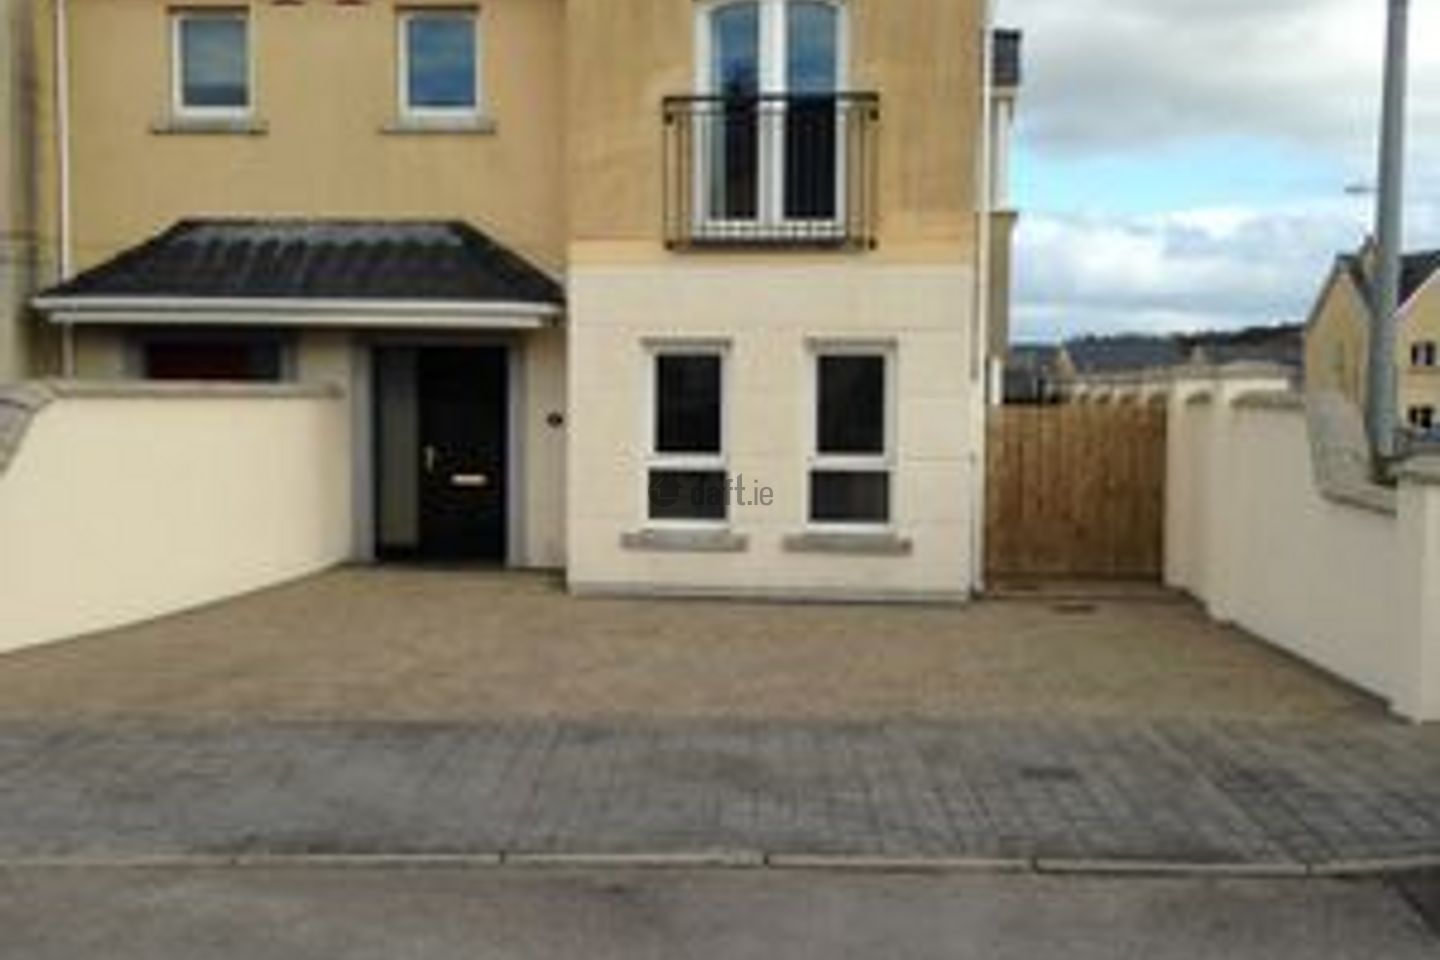 35 The Willows, Waterside, Carrigaline, Co. Cork